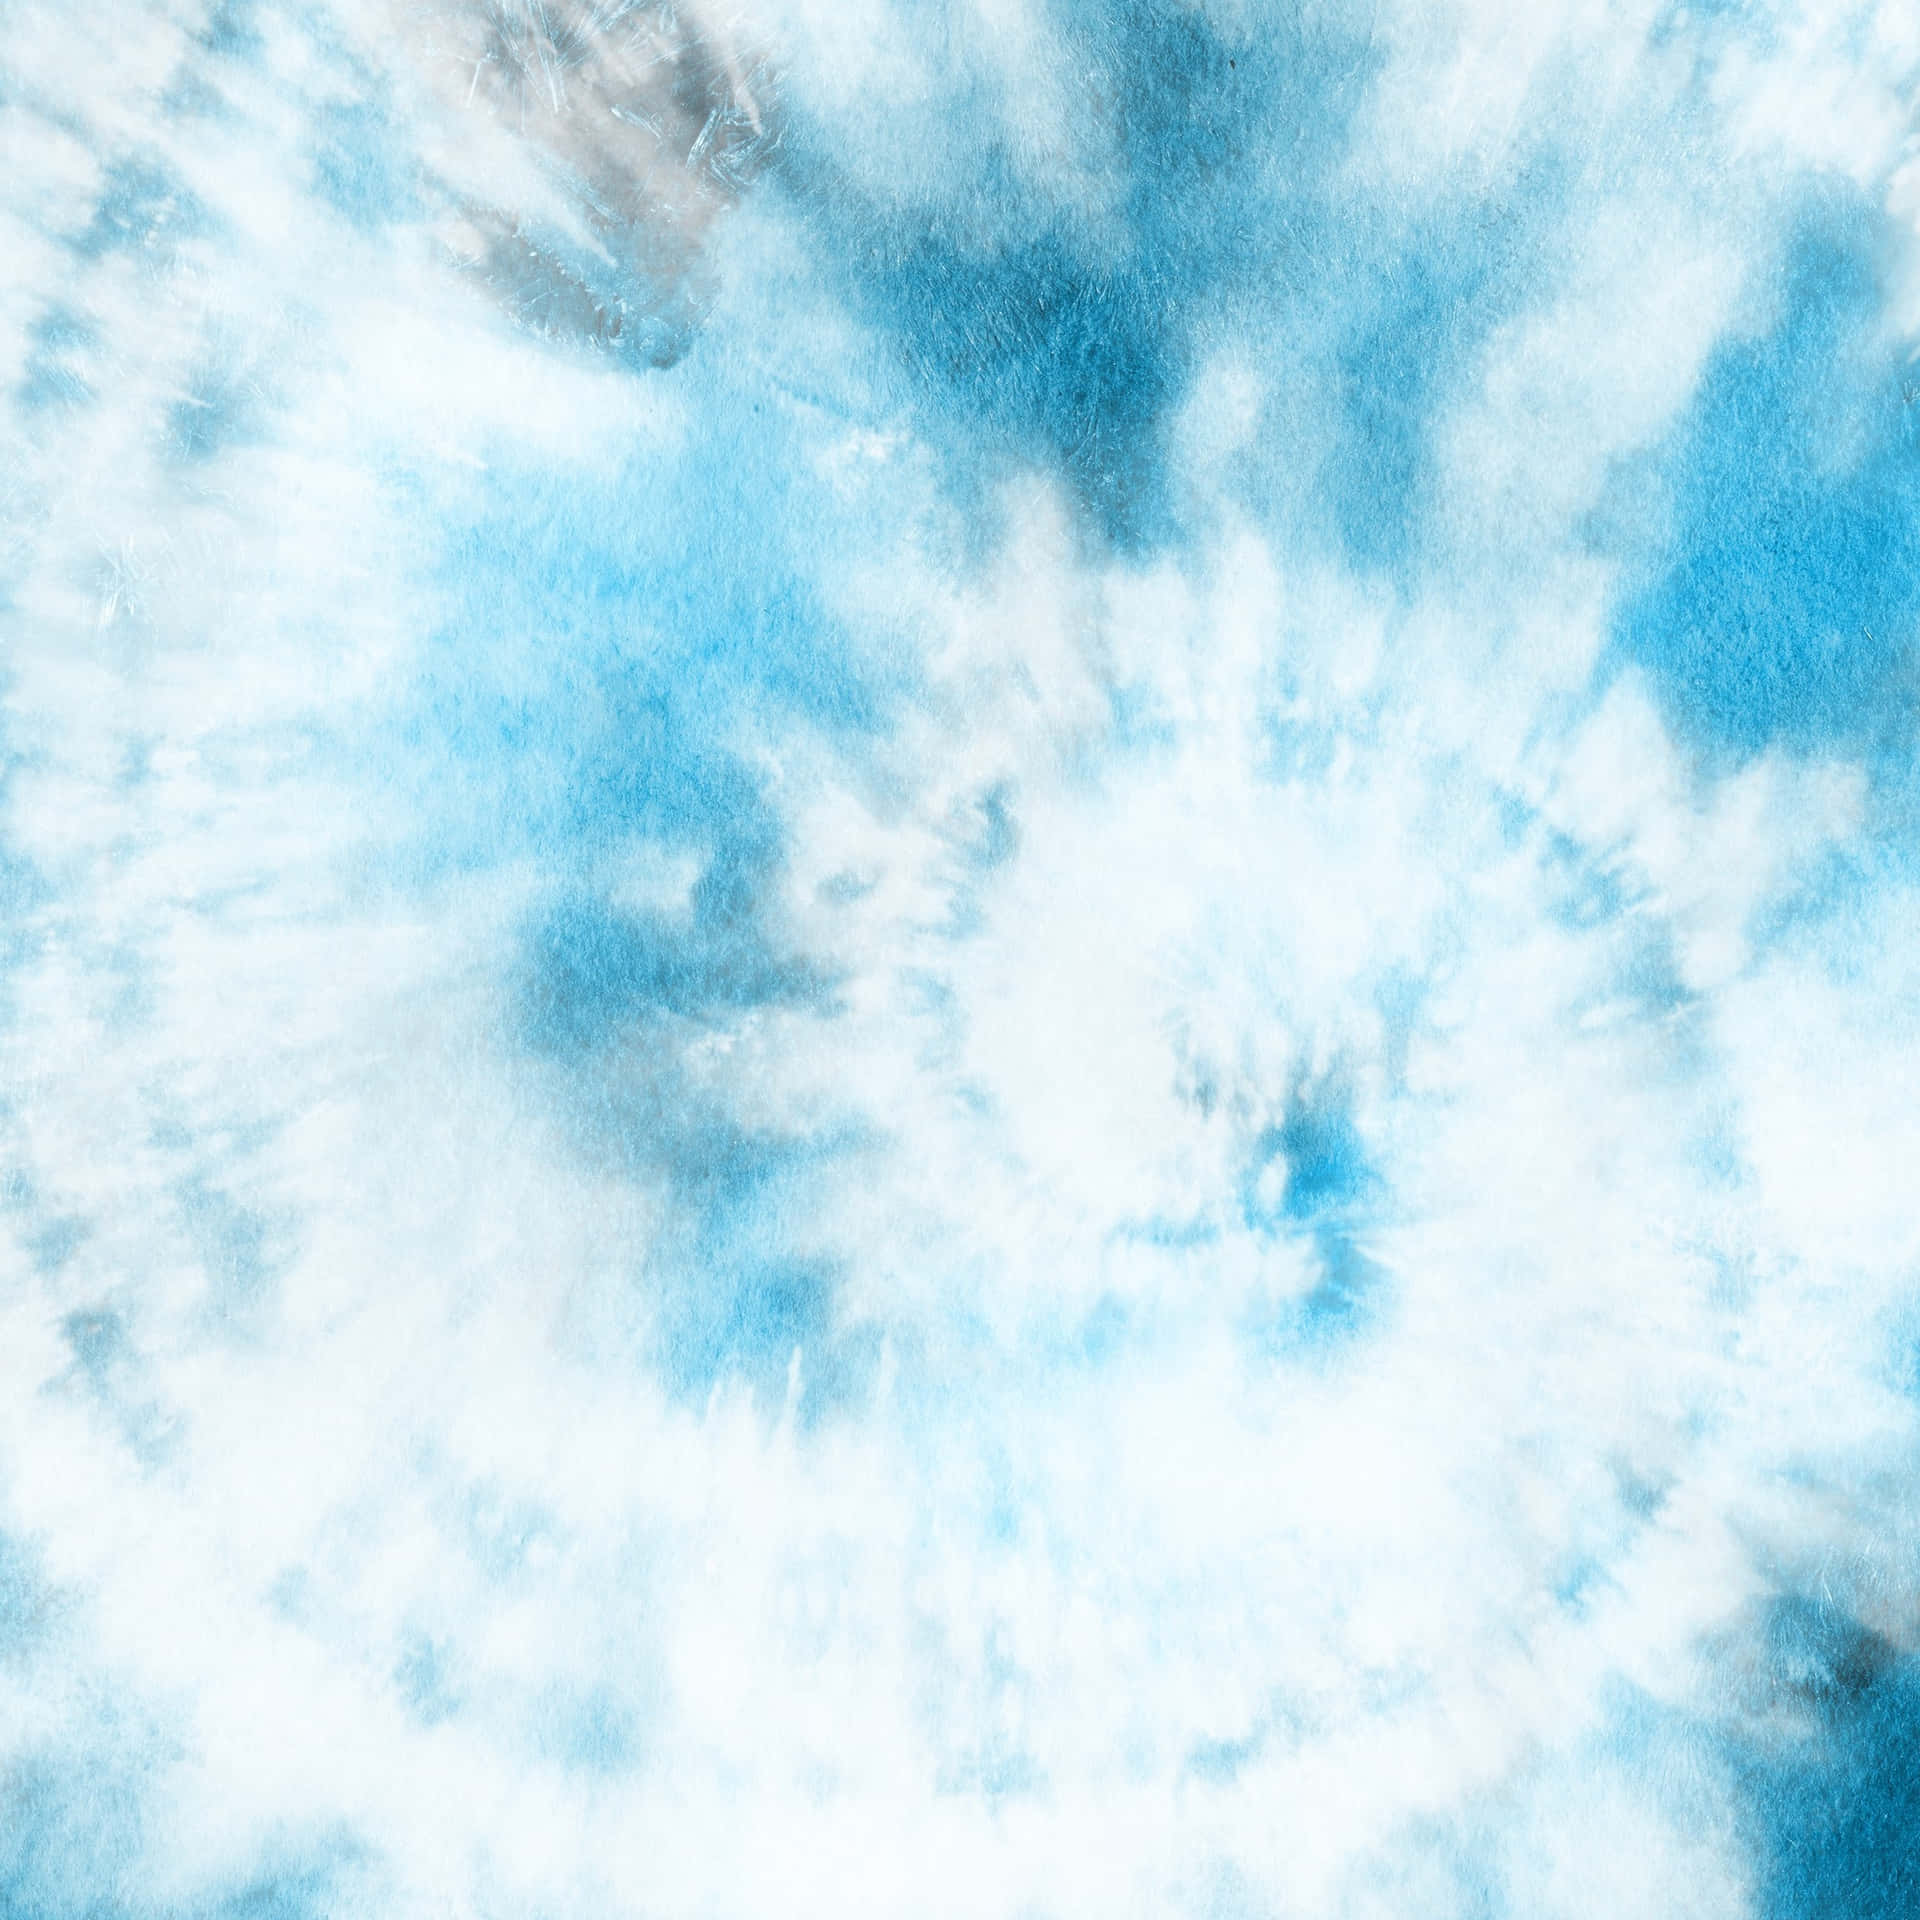 A Blue And White Tie Dye Painting Wallpaper